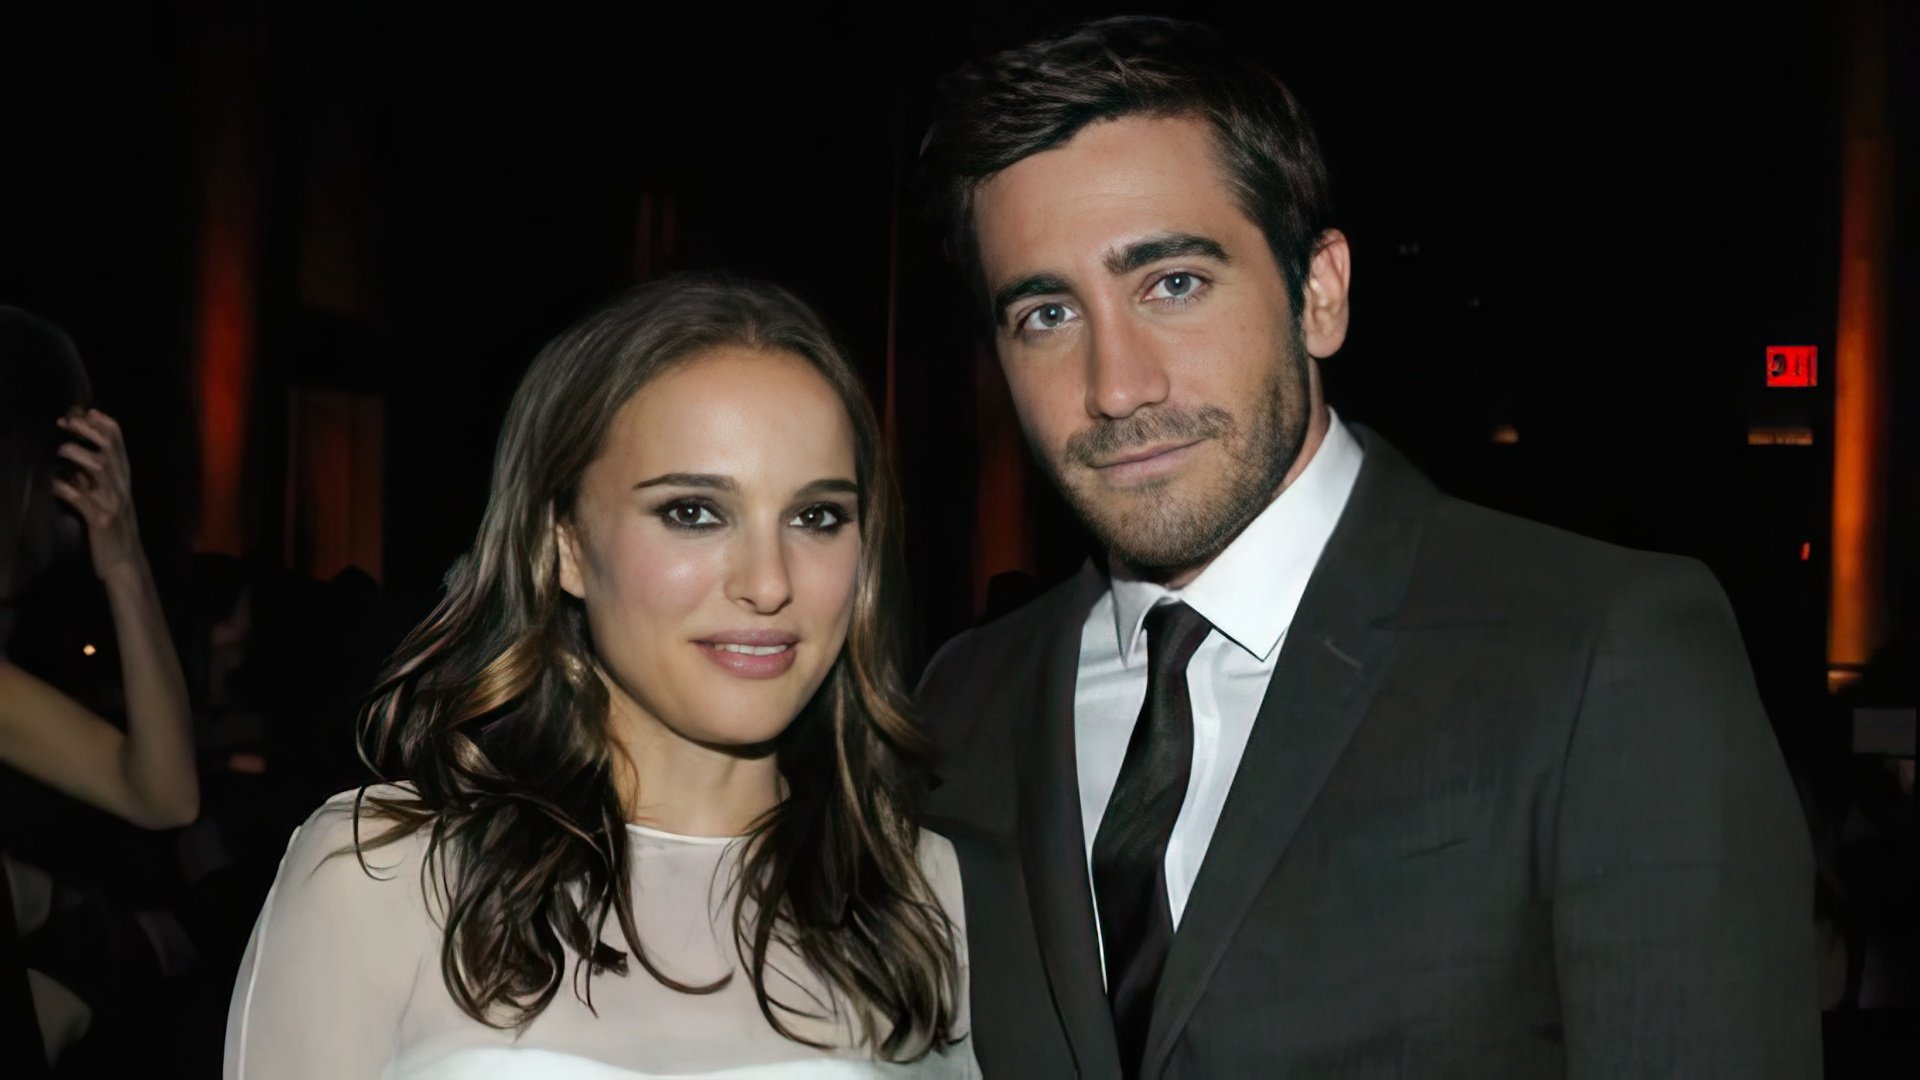 Portman was credited with a love affair with Jake Gyllenhaal